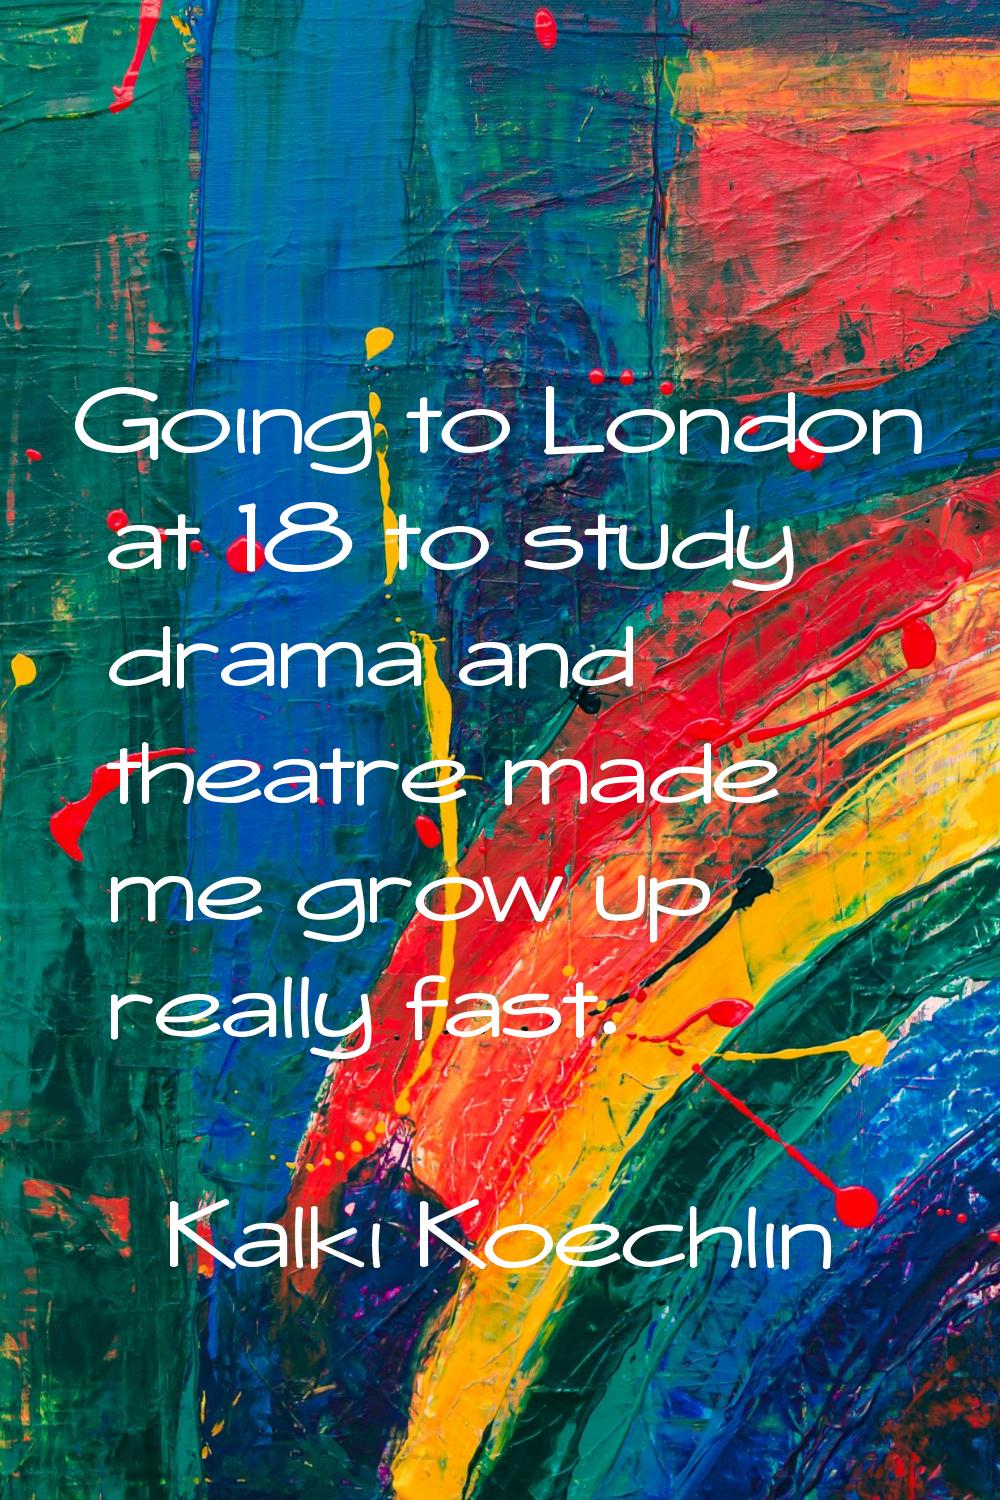 Going to London at 18 to study drama and theatre made me grow up really fast.